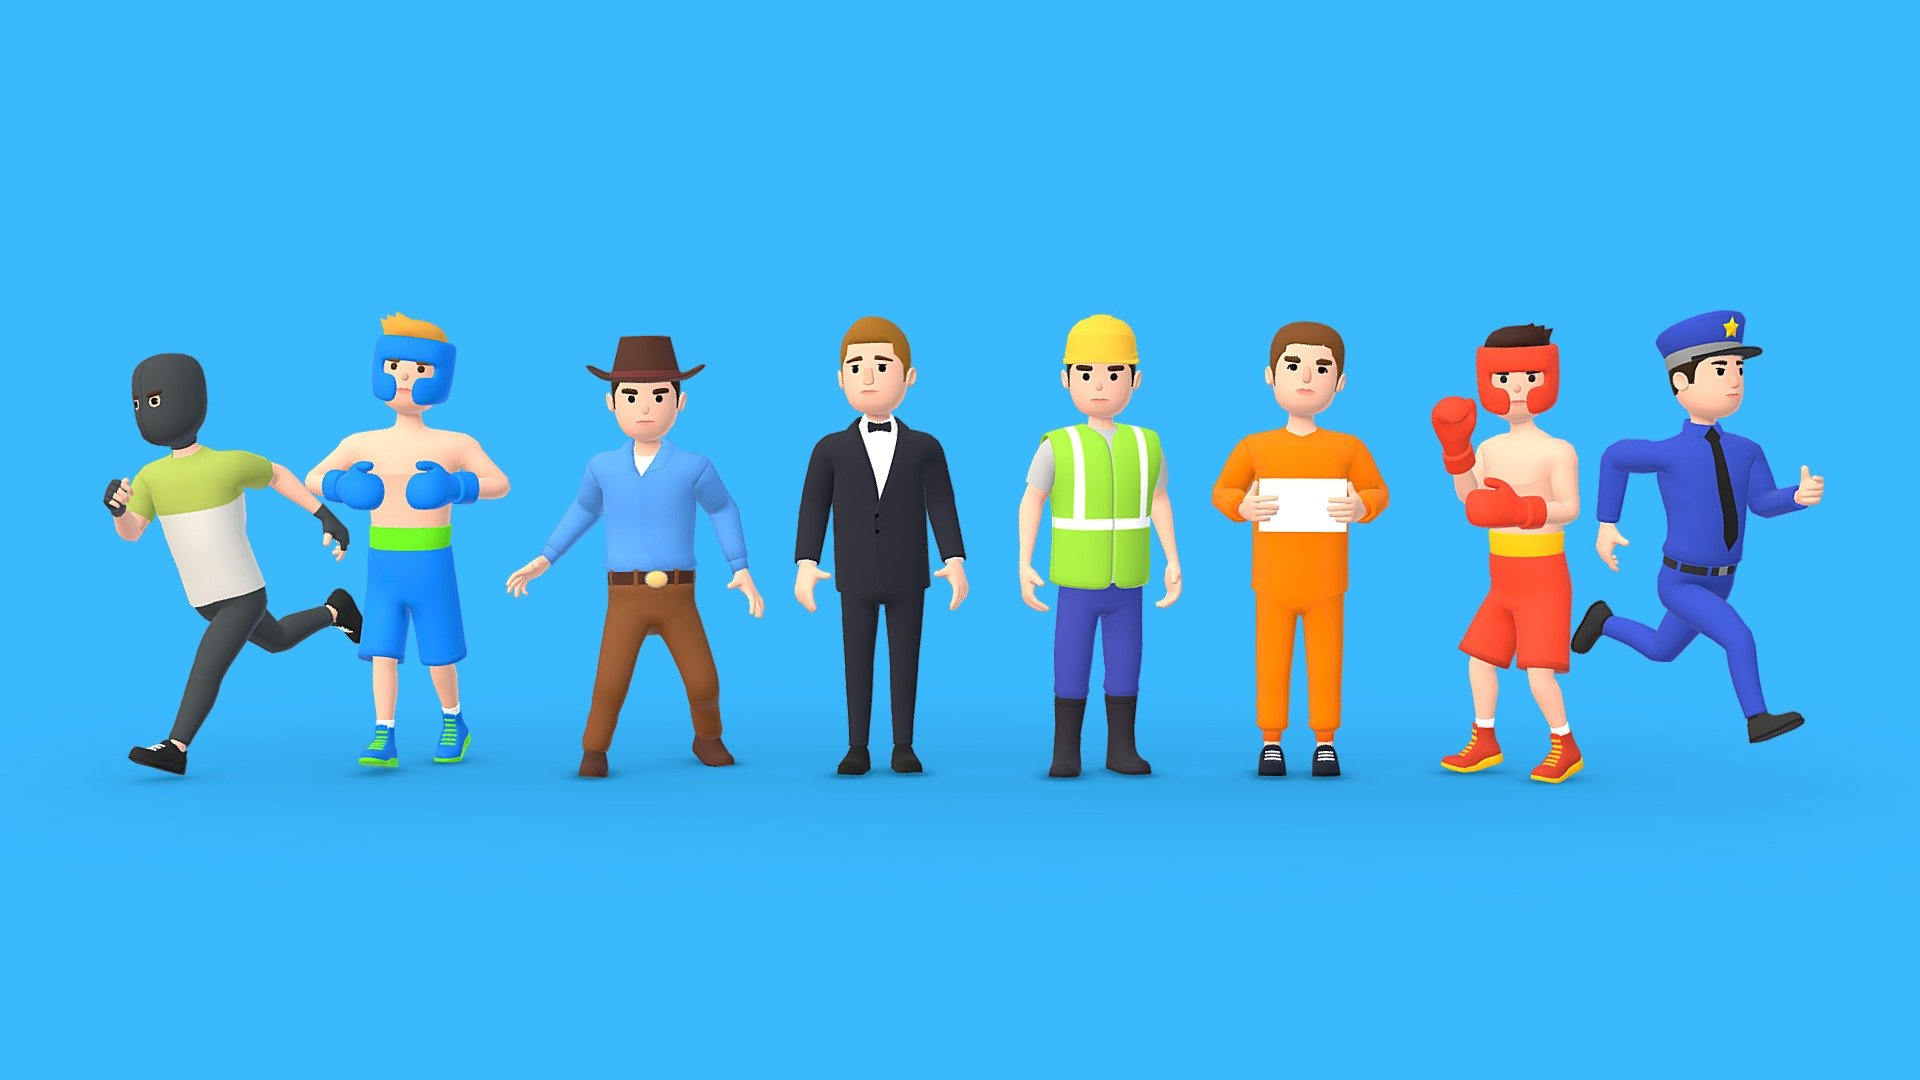 HYPERCASUAL - Characters Vol 6. We are excited to introduce you to our latest collection of characters designed to take your game and app projects to the next level.

Key Features:




Free Updates: Your purchase includes free updates, meaning you'll have access to additional content and future enhancements.

Quality Support: Our support team is available to assist you with any questions or issues. We are committed to providing you with the best possible experience.

Commercial License: With HYPER CASUAL CHARACTERS VOL 6, you'll receive a full commercial license to use these characters in your projects without legal worries.

Features: Blender Native File, FBX format, PNG Textures 1024x1024, UV Maps, Body Rig

Don't miss the opportunity to elevate your games and apps to the next level with HYPER CASUAL CHARACTERS VOL 6. Get this collection today and start bringing your projects to life creatively and excitingly!

CHECK OUR HYPER CASUAL CHARACTER COLLECTION - HYPER CASUAL CHARACTERS VOL 6 - Buy Royalty Free 3D model by thcyrax (@thcyrax3D) 3d model